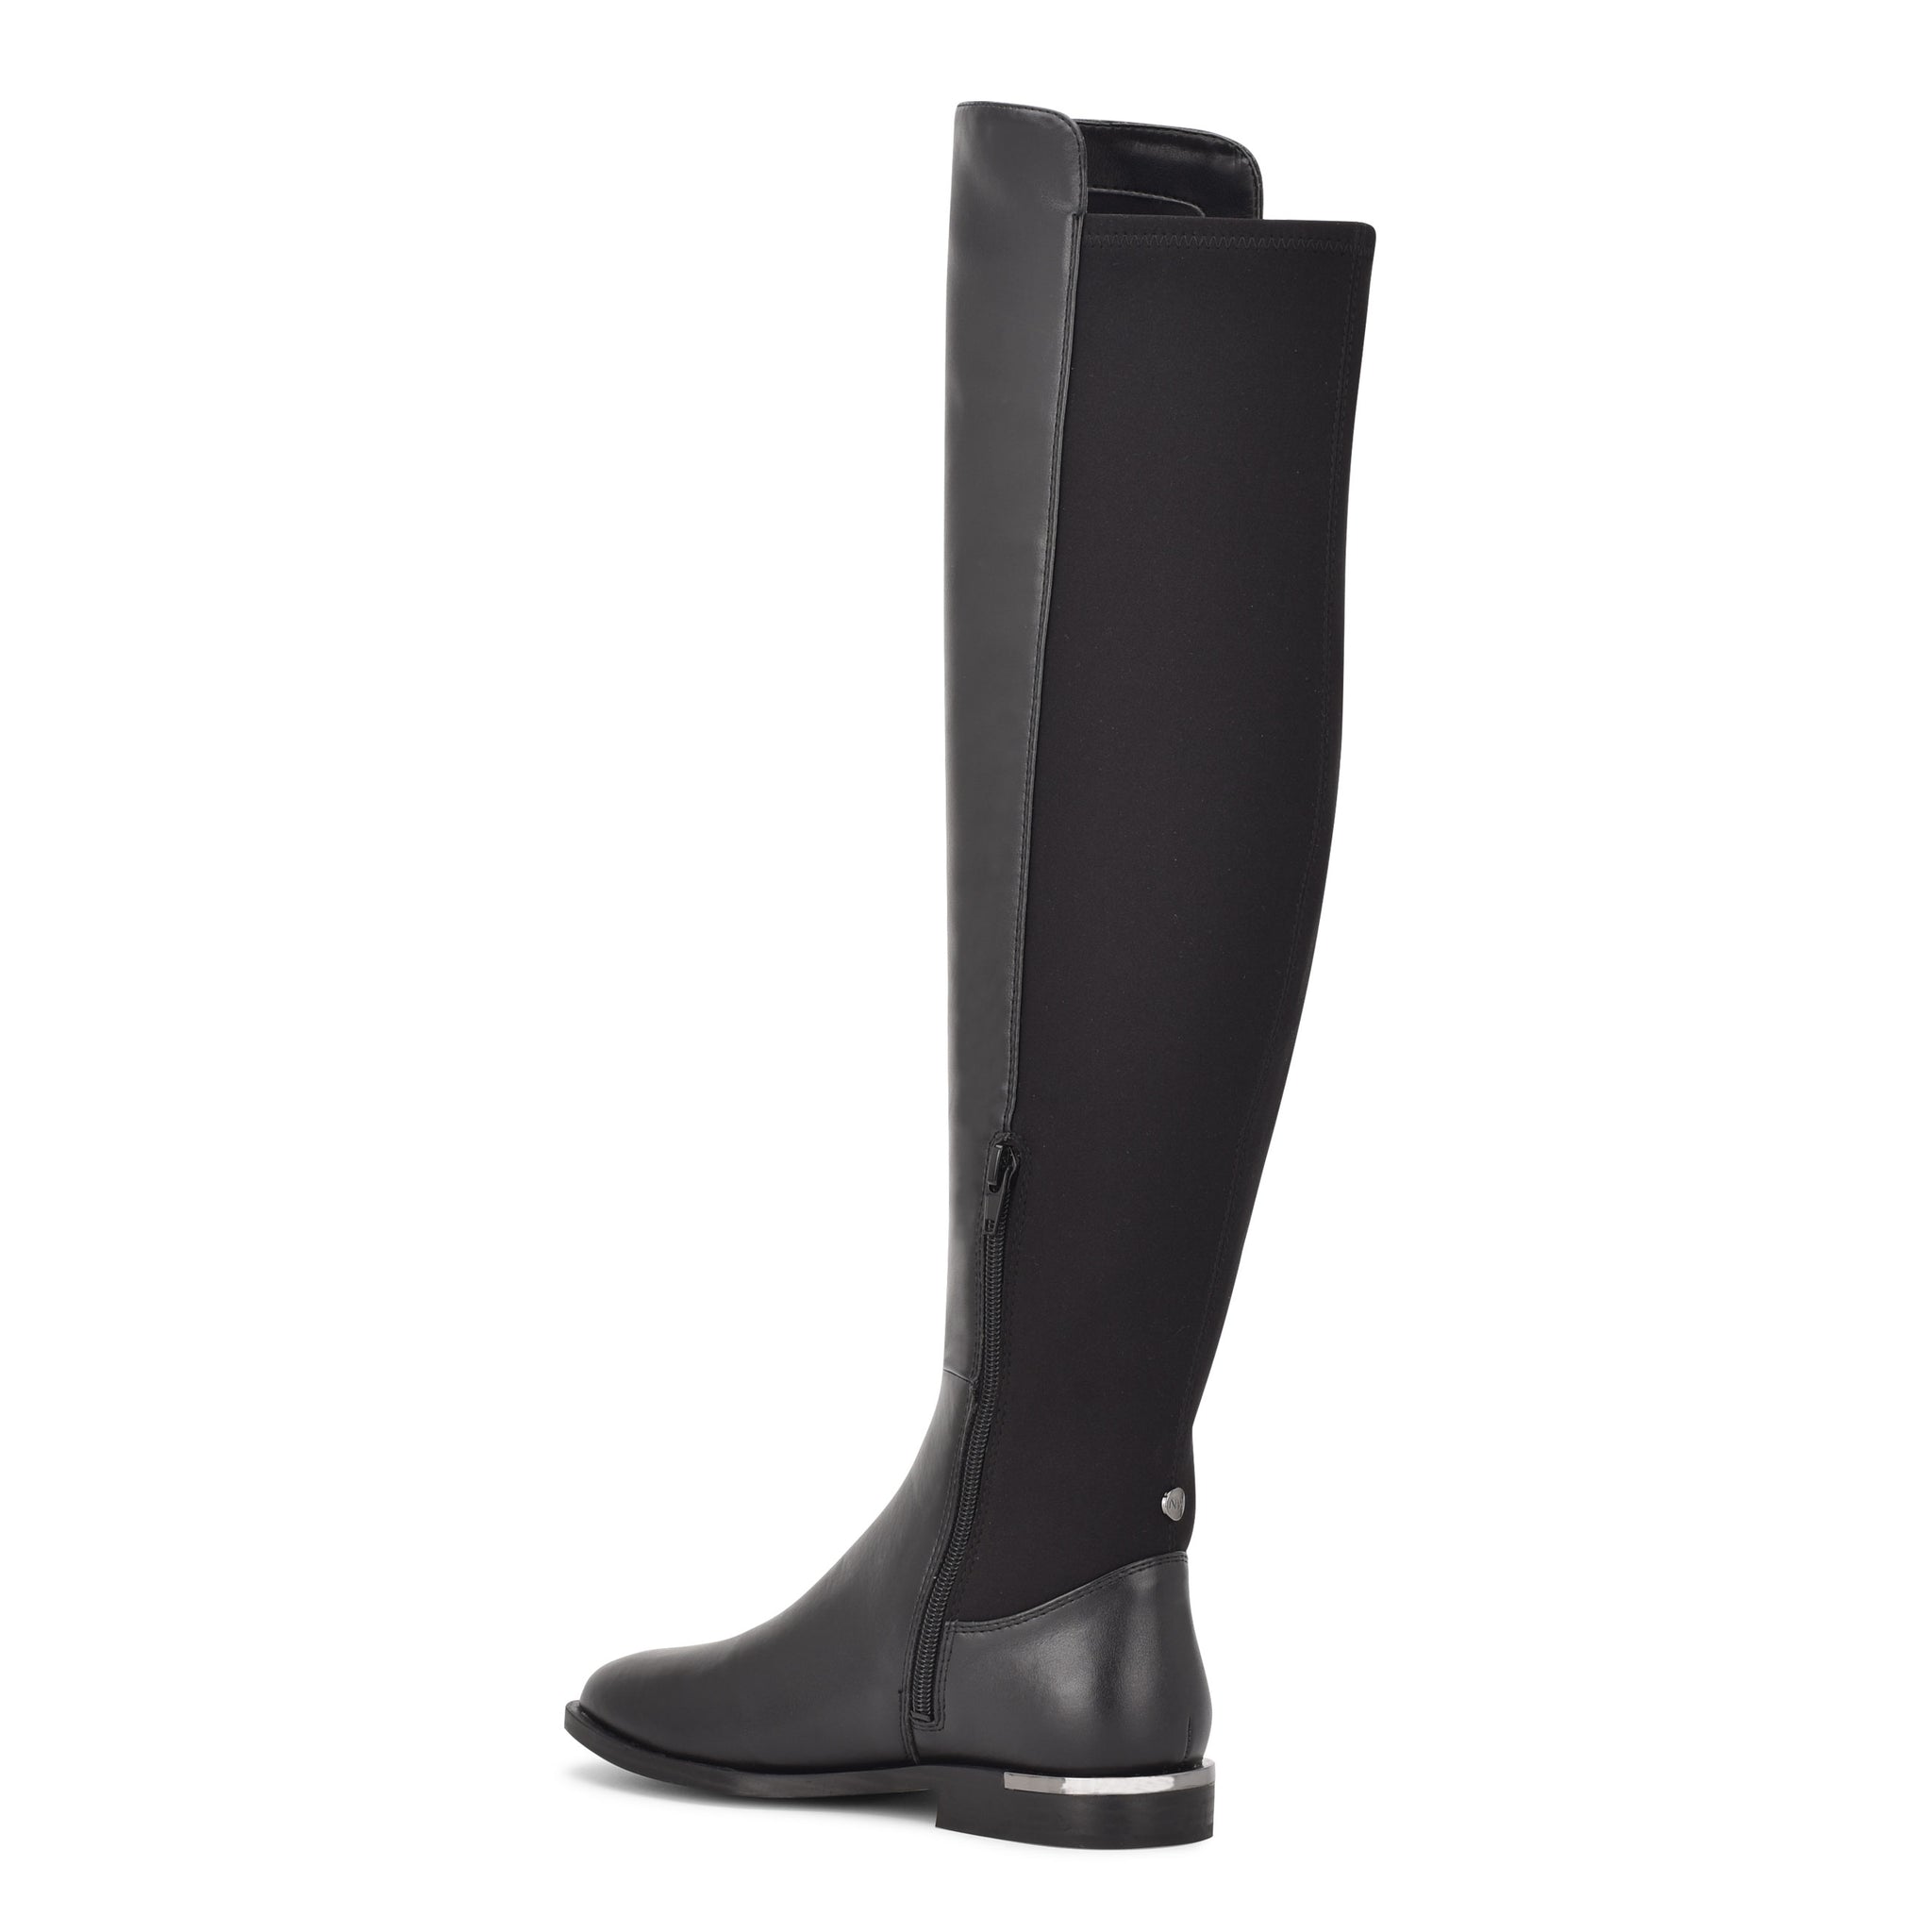 Allair Stretch Back Over the Knee Boots - Nine West